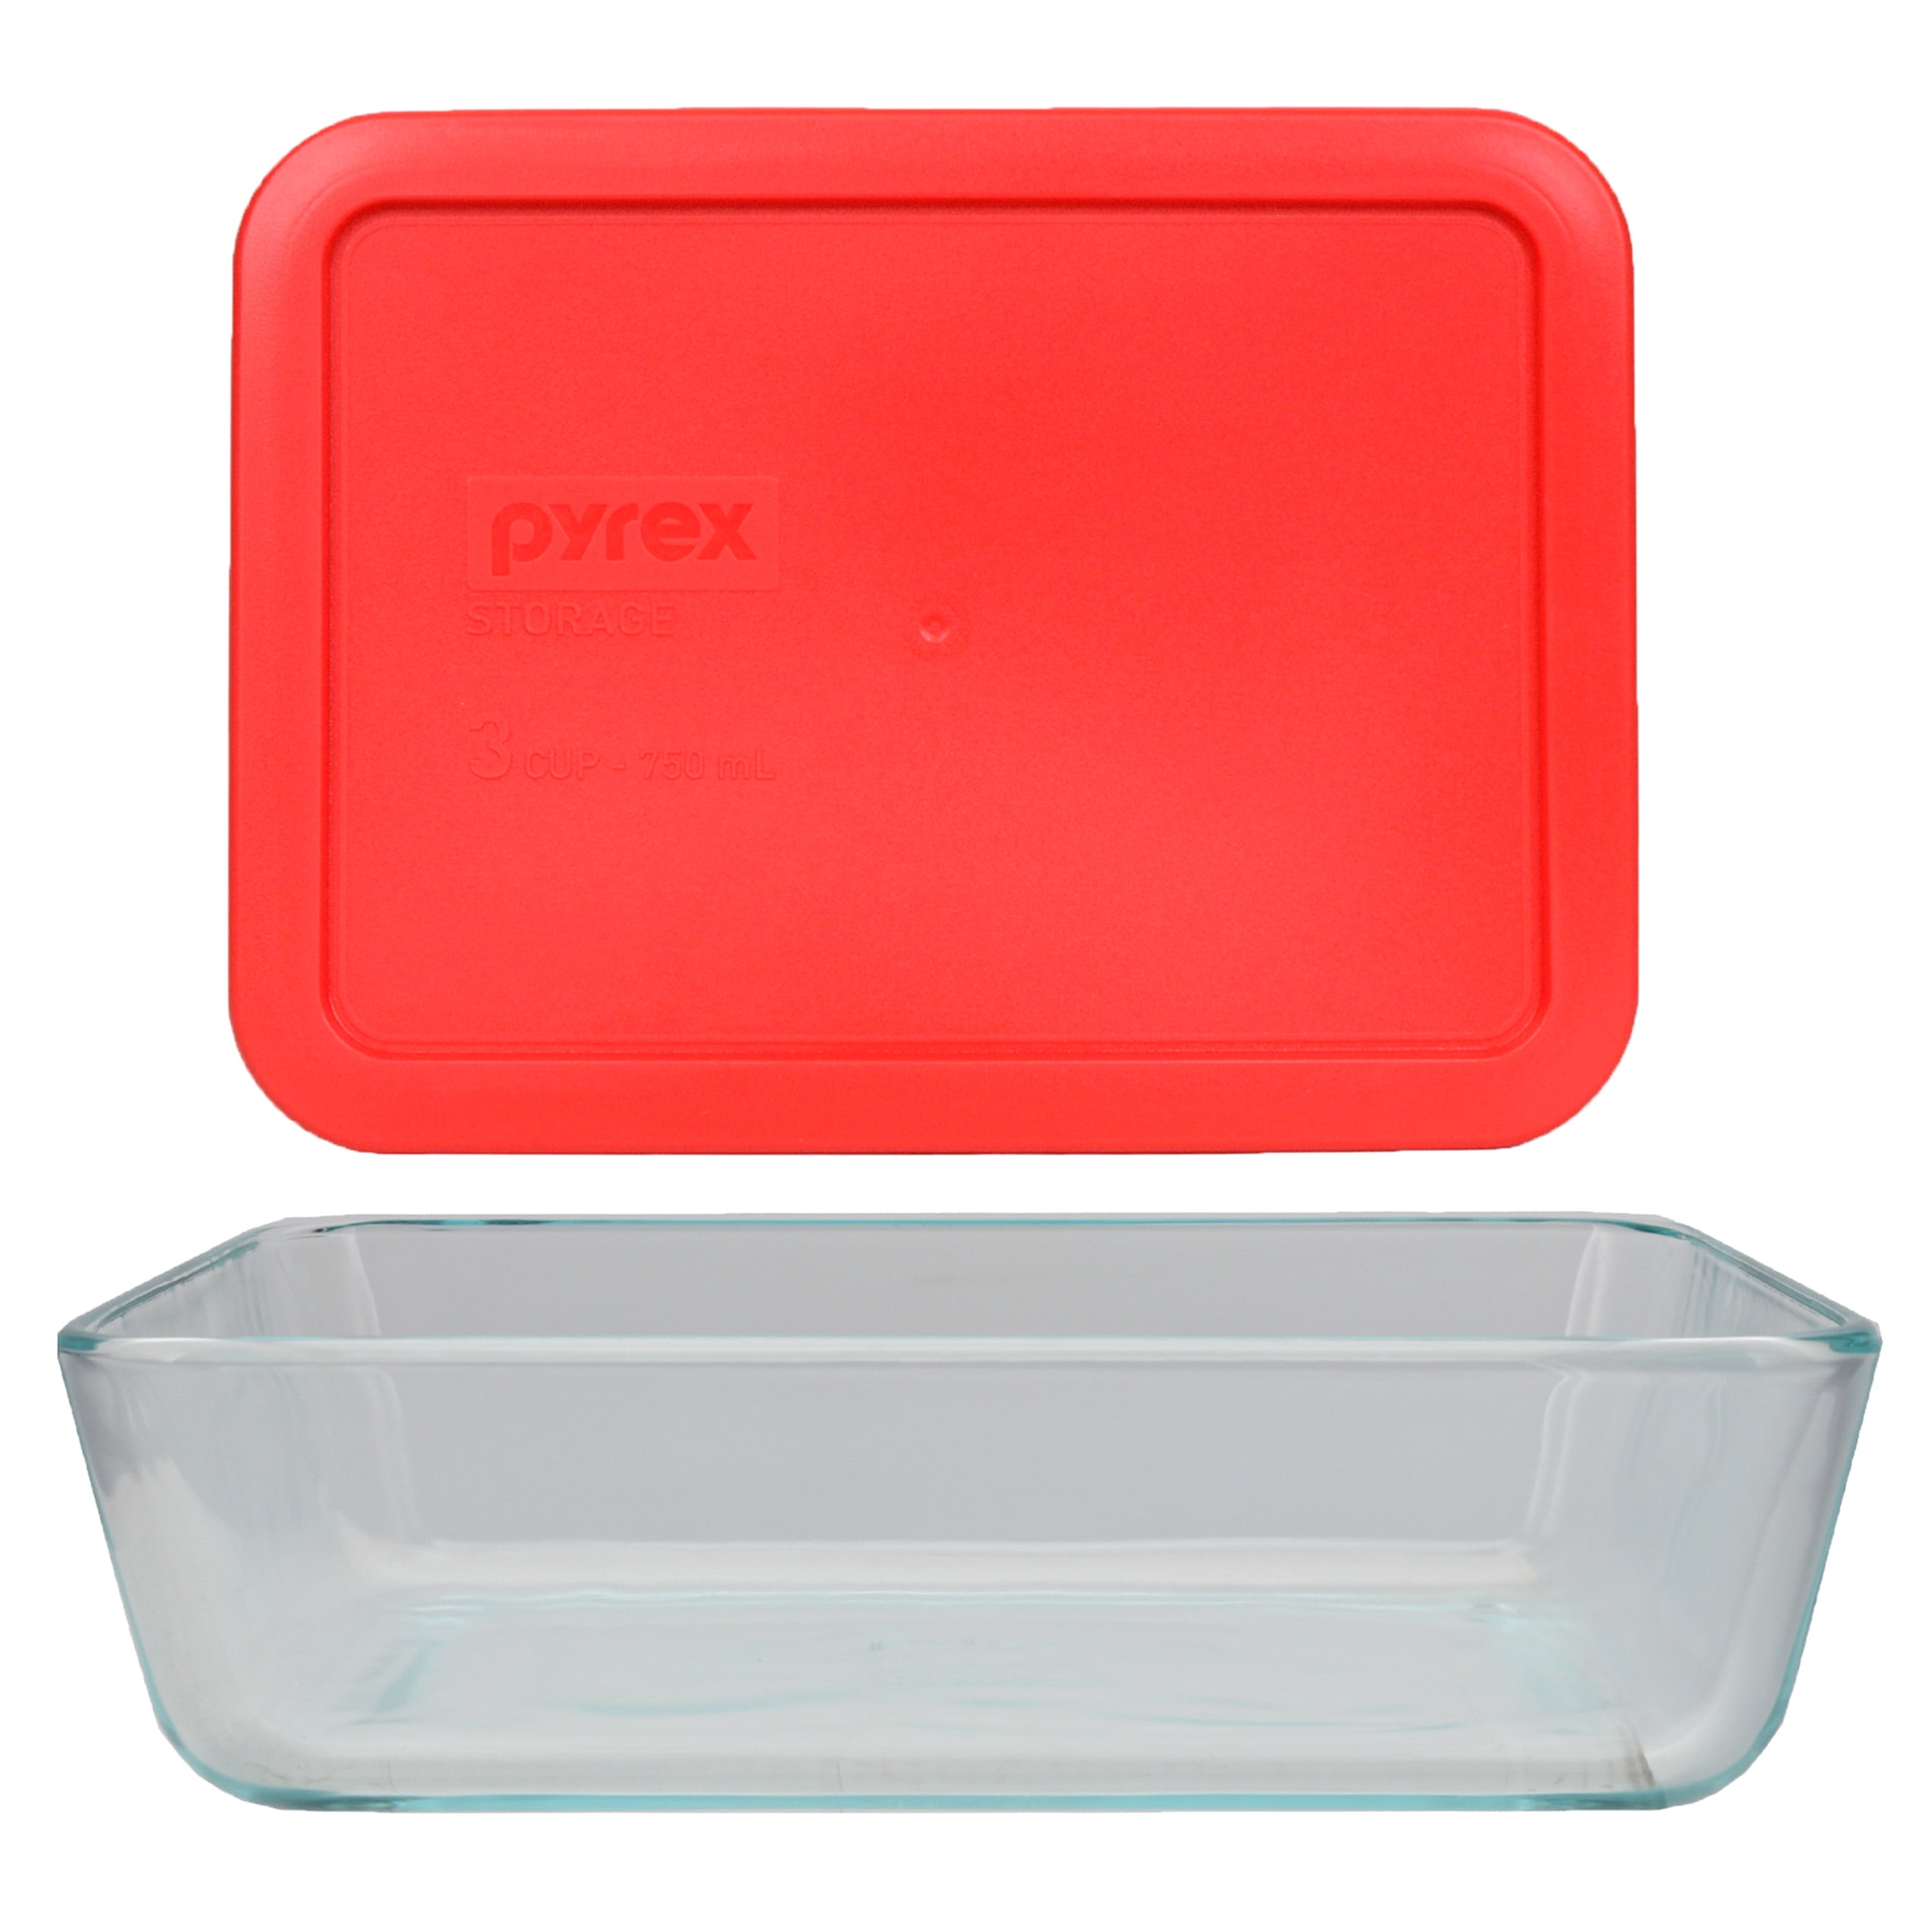 Pyrex 7210-PC Rectangle 3 Cup Storage Lid for Glass Dish 1, Red